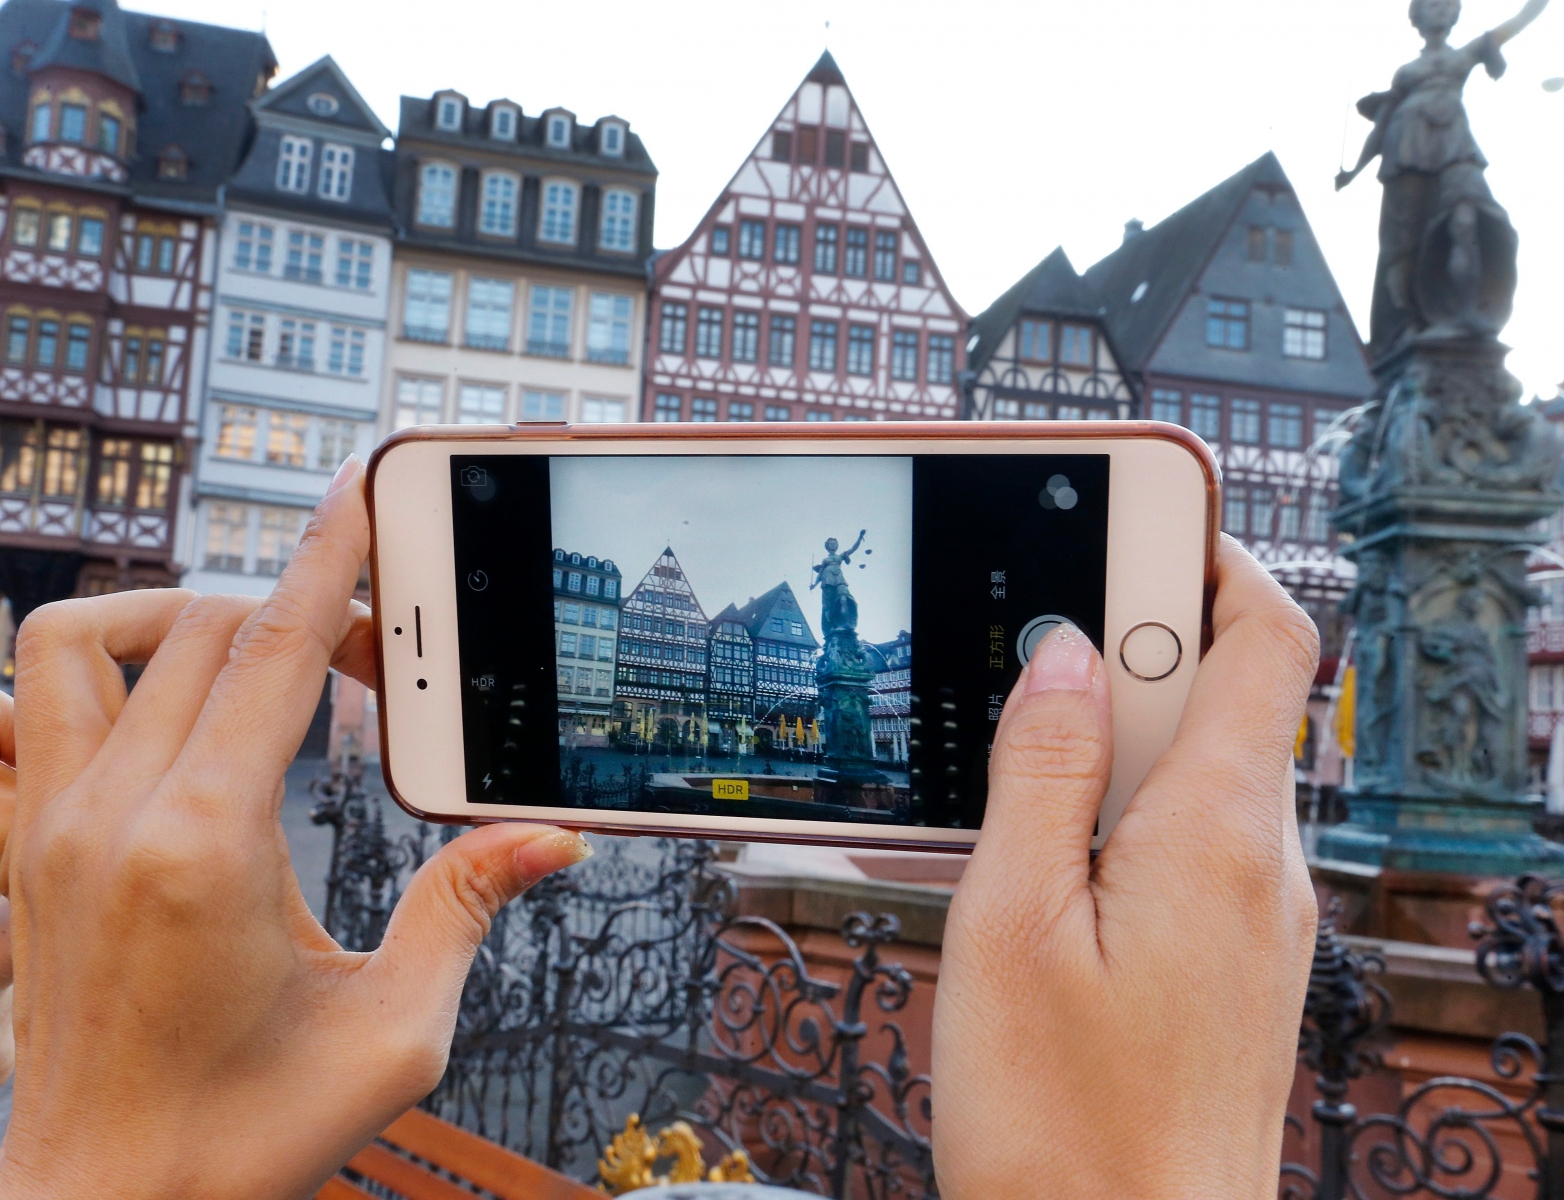 A Chinese tourist takes a picture of the half-timber houses at the Roemerberg square in Frankfurt, Germany, Friday, Oct. 14, 2016. (AP Photo/Michael Probst) Germany Daily Life